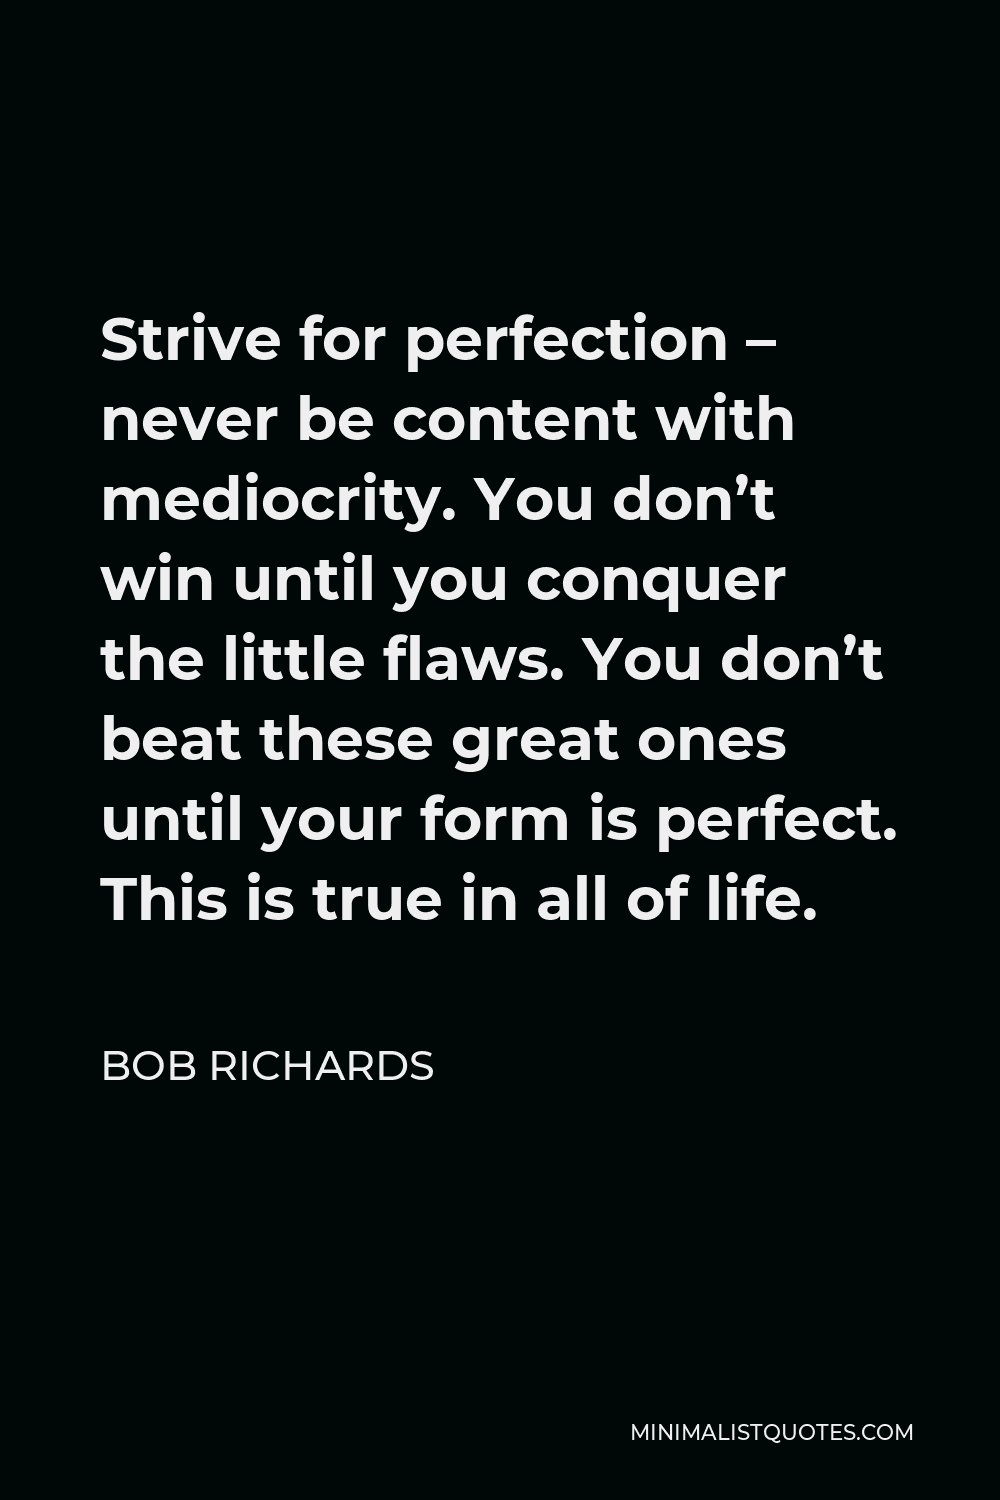 Bob Richards Quote - Strive for perfection – never be content with mediocrity. You don’t win until you conquer the little flaws. You don’t beat these great ones until your form is perfect. This is true in all of life.